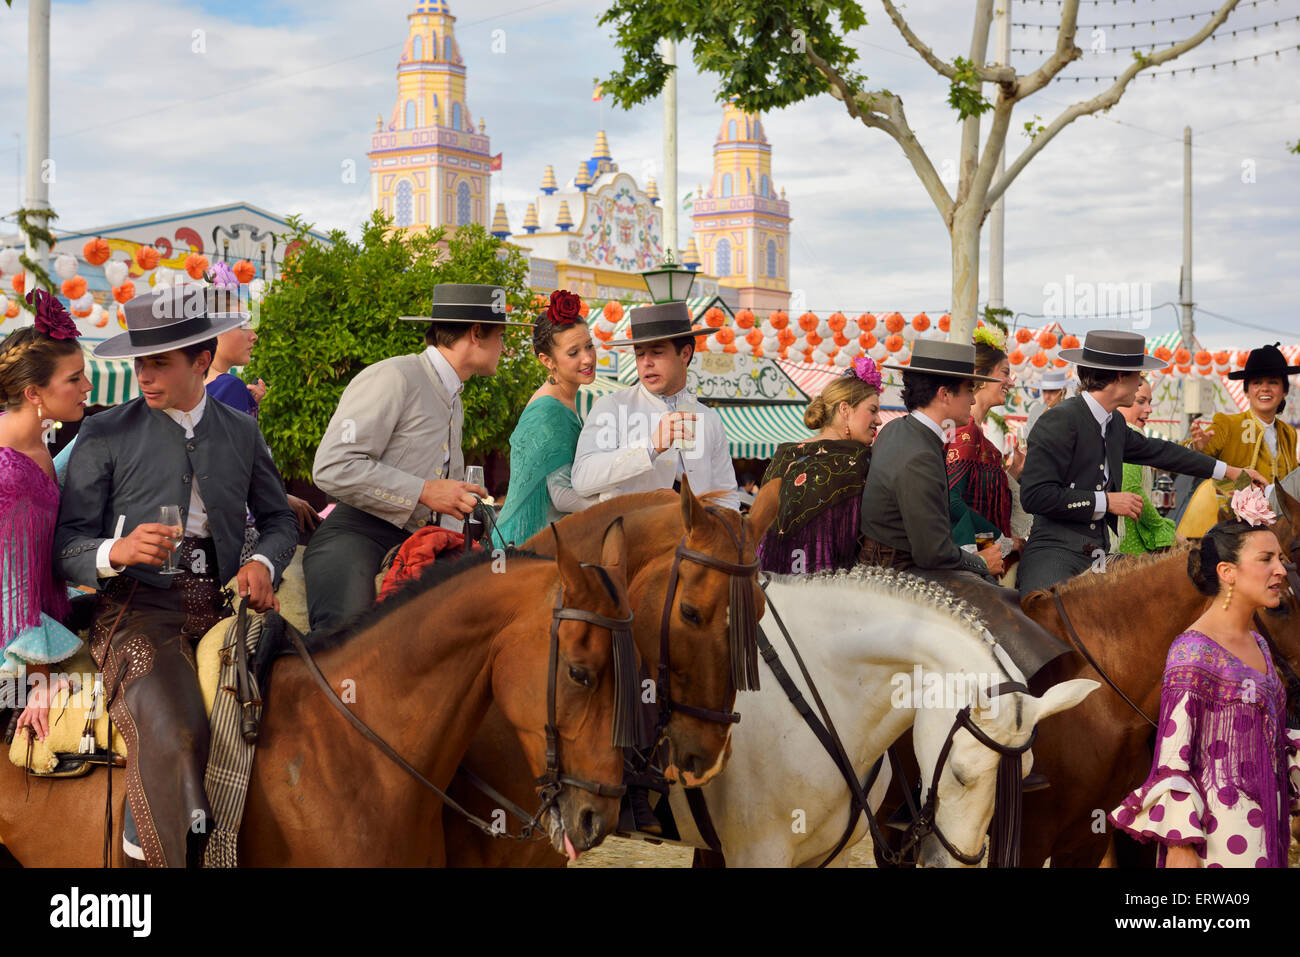 Group of couples on horseback drinking and partying at the Seville April Fair with Casetas and Main Gate Spain Stock Photo